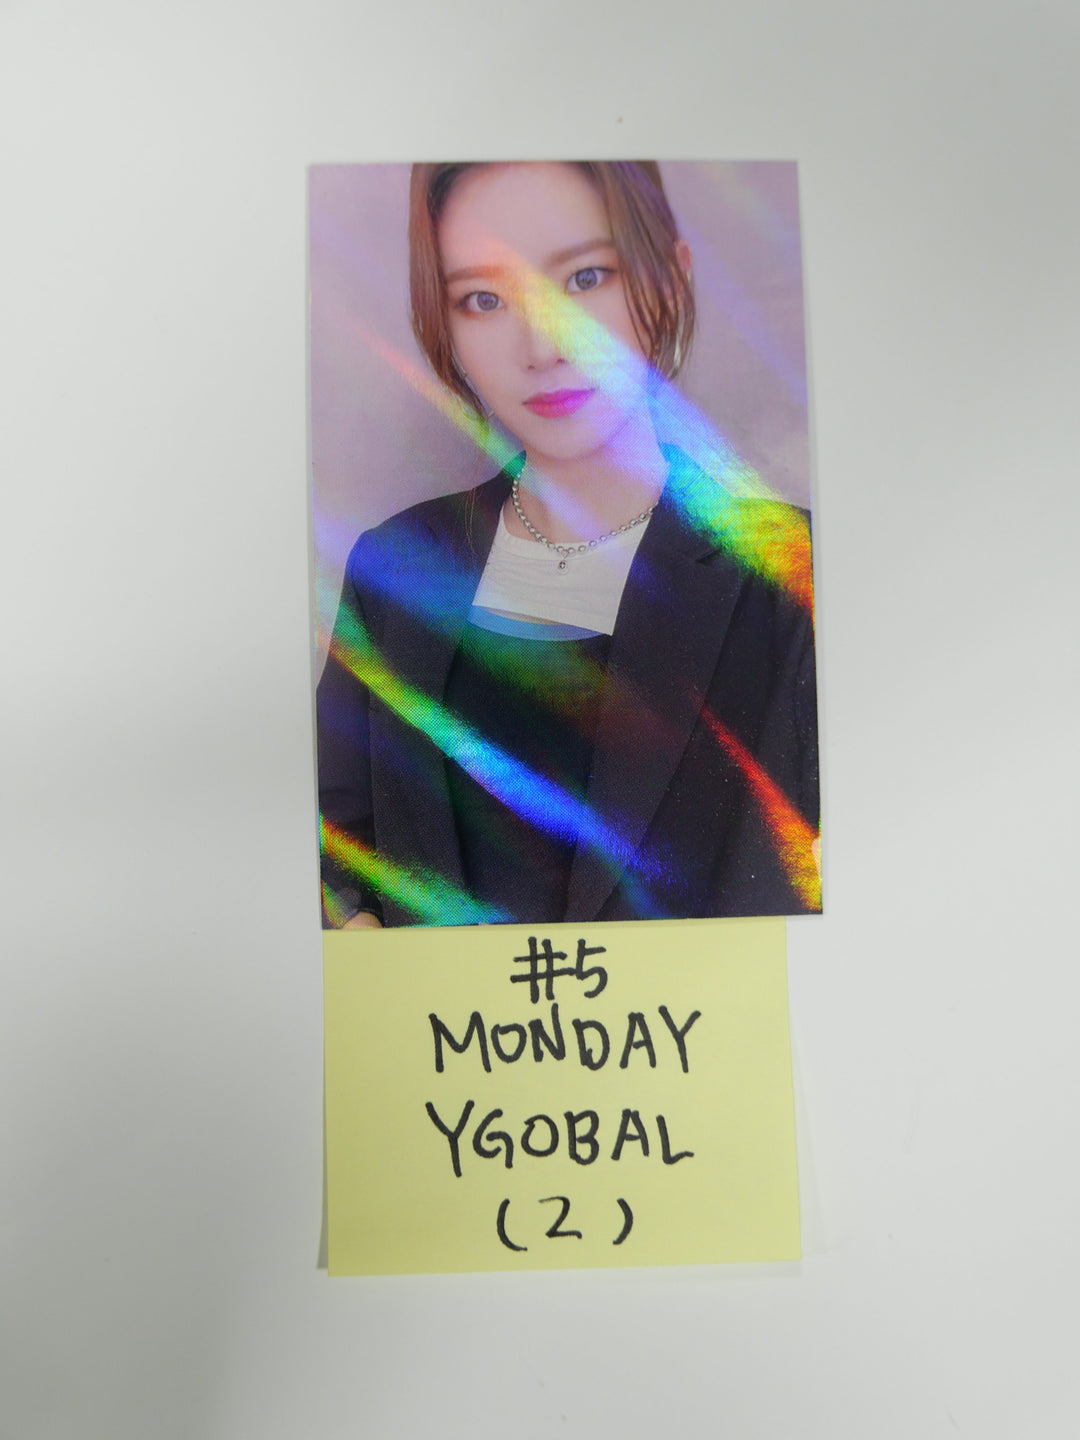 Weeekly "We Play" 3rd mini - Yglobal Pre-order Event Hologram Photocard